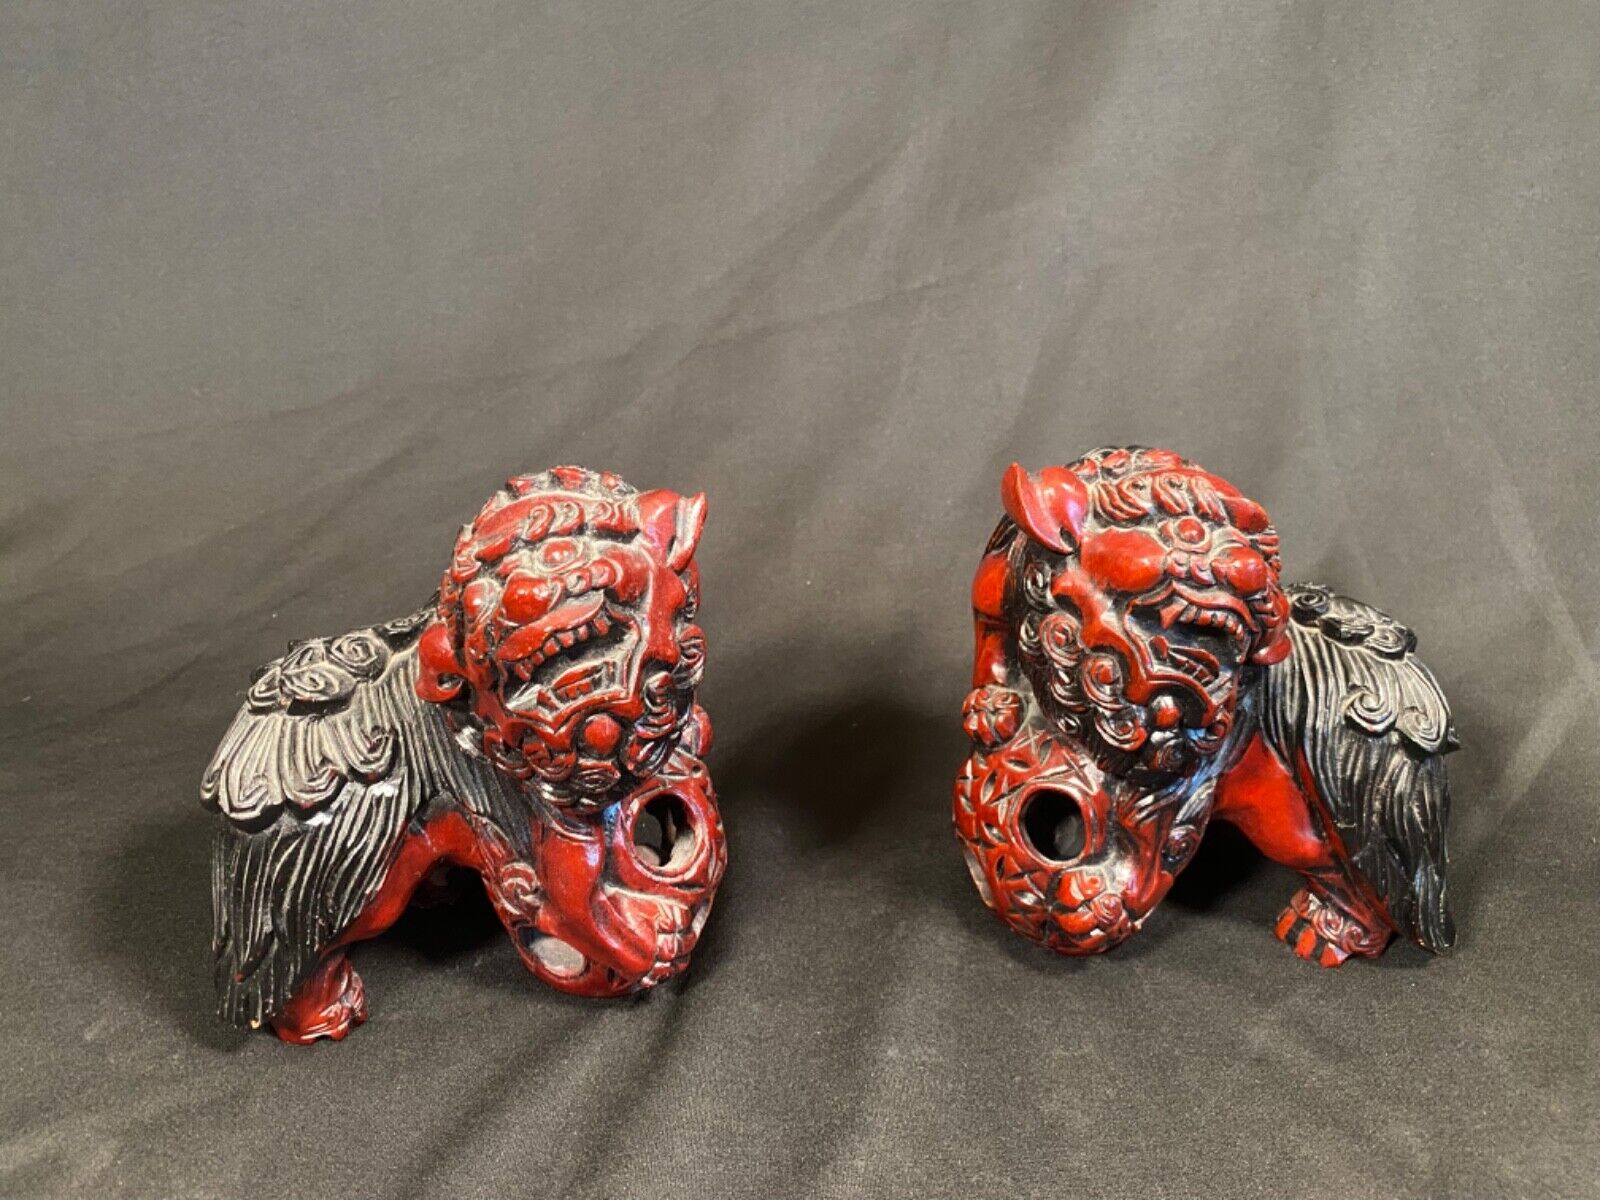 A Pair of 1970s Japanese Handcrafted Lacquer Foo Dogs